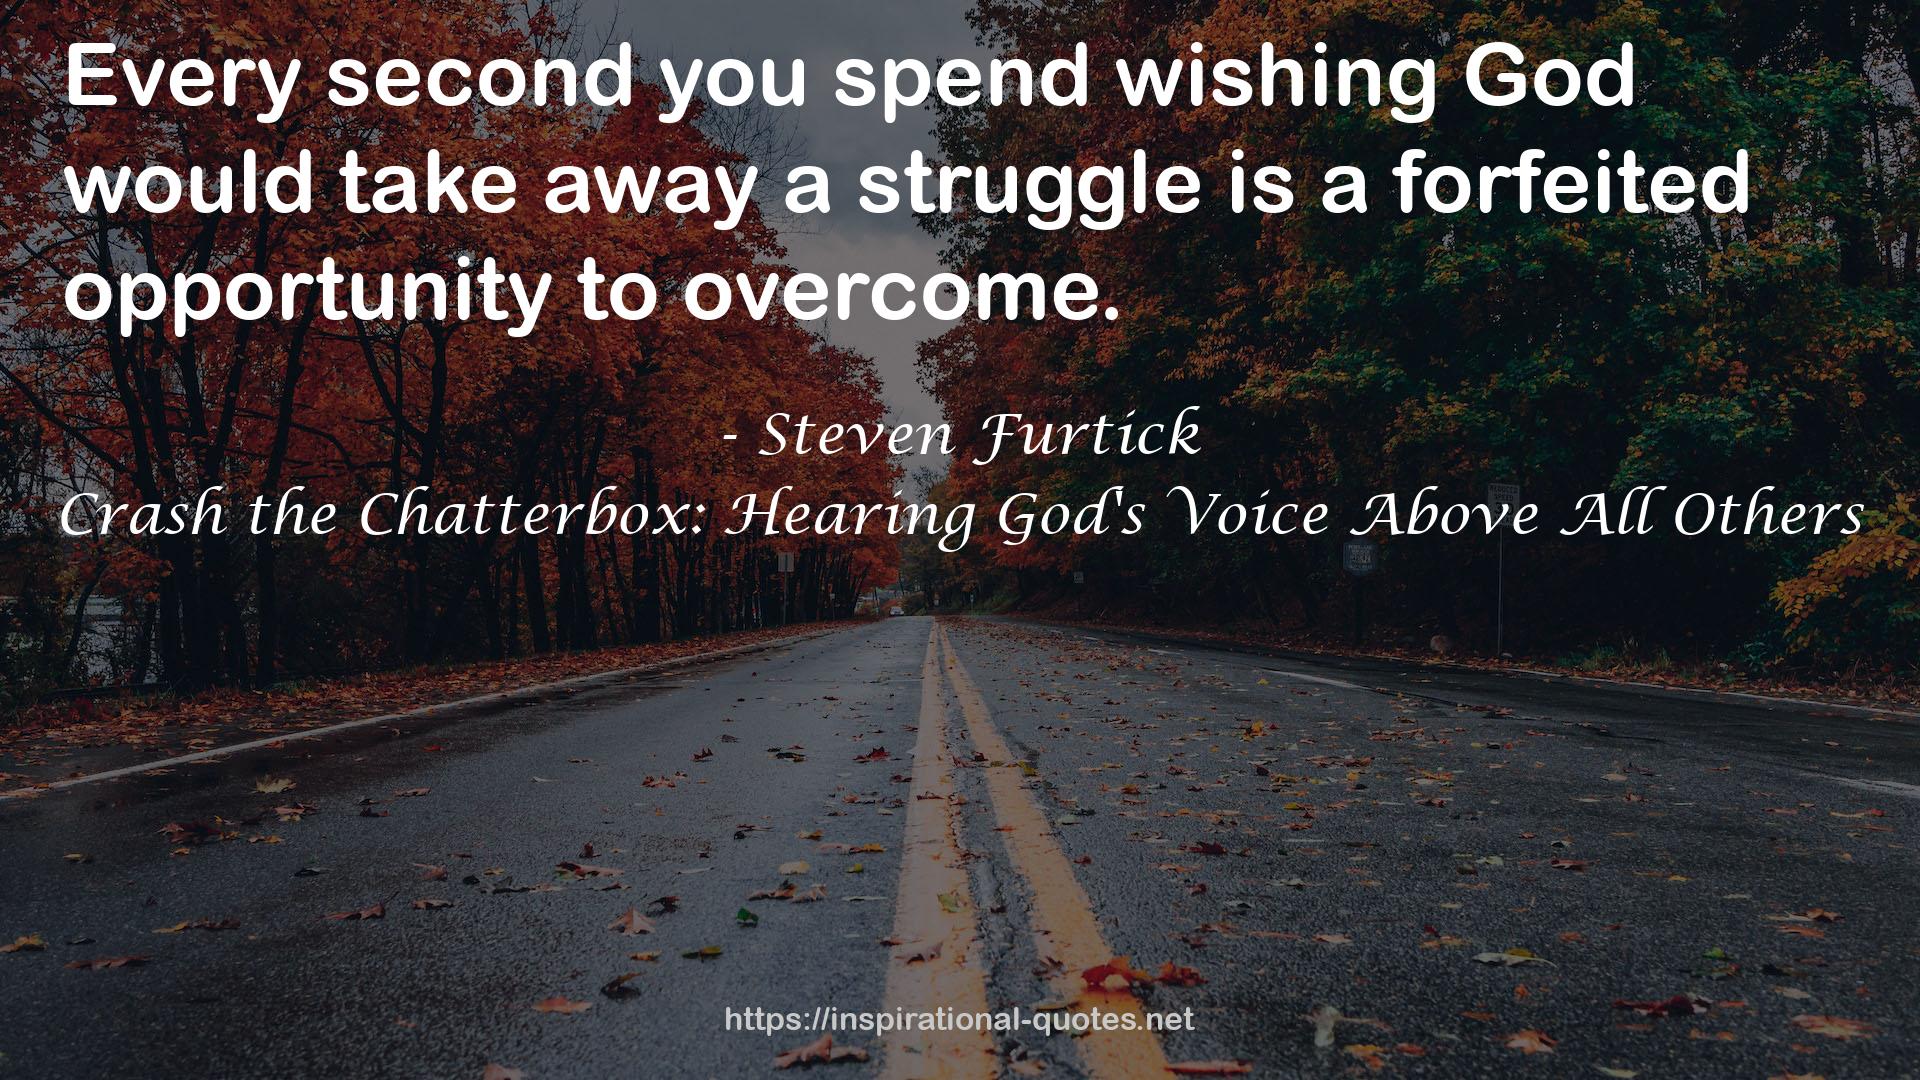 Crash the Chatterbox: Hearing God's Voice Above All Others QUOTES